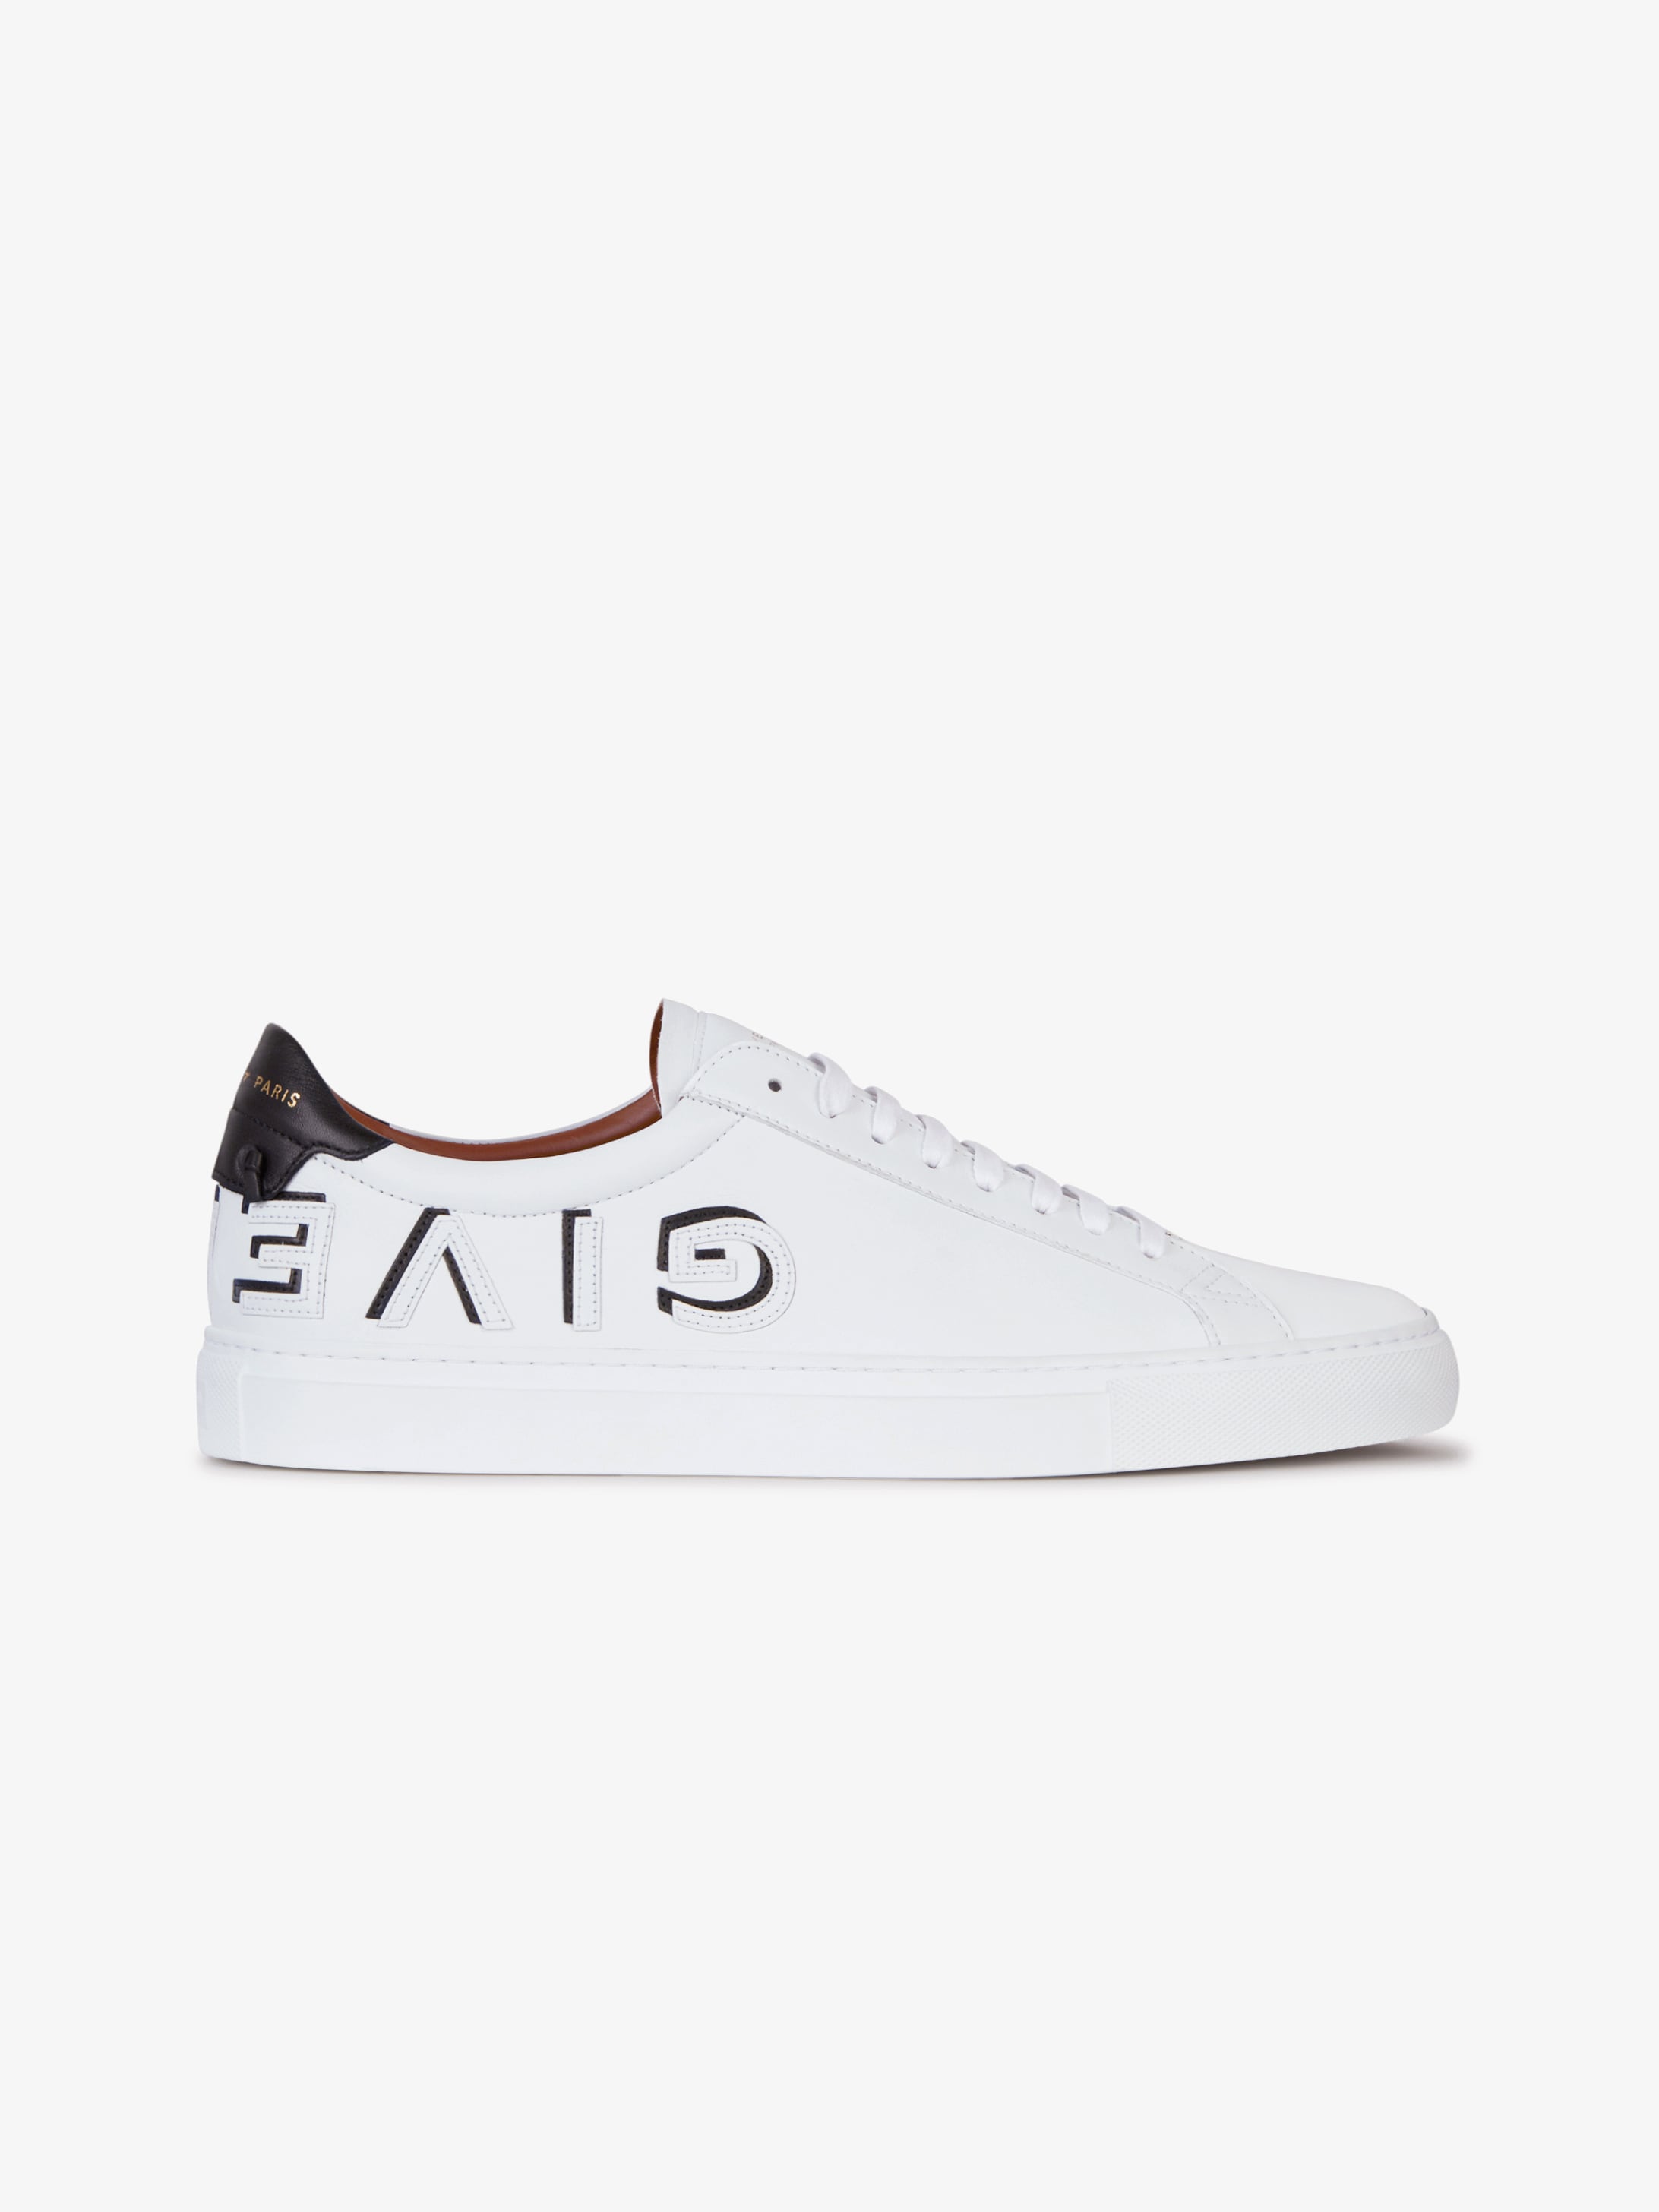 GIVENCHY reverse sneakers in leather | GIVENCHY Paris